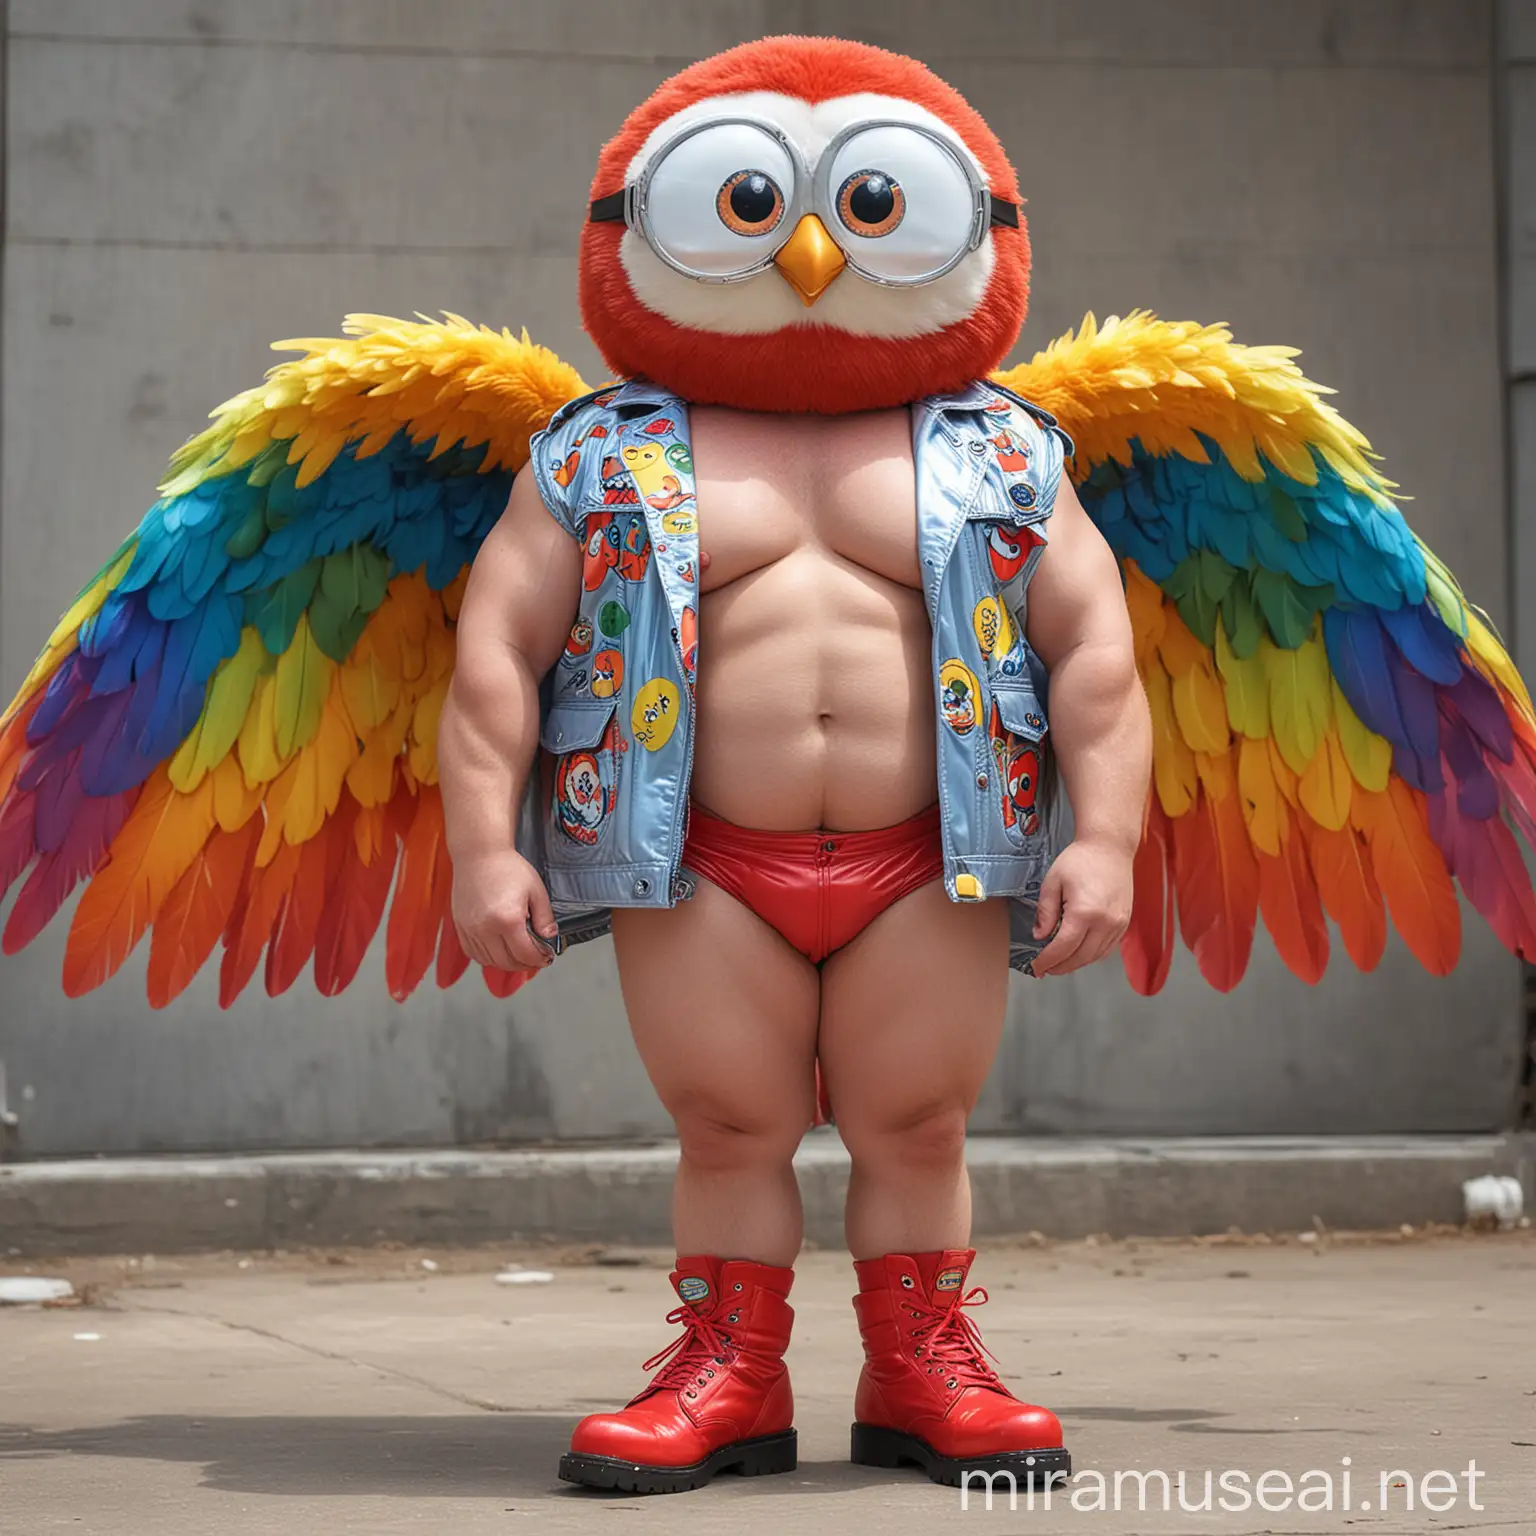 Topless 40s Happy Ultra beefy Red Head Bodybuilder Daddy Big Eyes with Beard Wearing Multi-Highlighter Bright Rainbow Colored See Through huge Eagle Wings Shoulder Jacket short shorts low leather boots and Flexing his Big Strong Arm with Doraemon Goggles on forehead